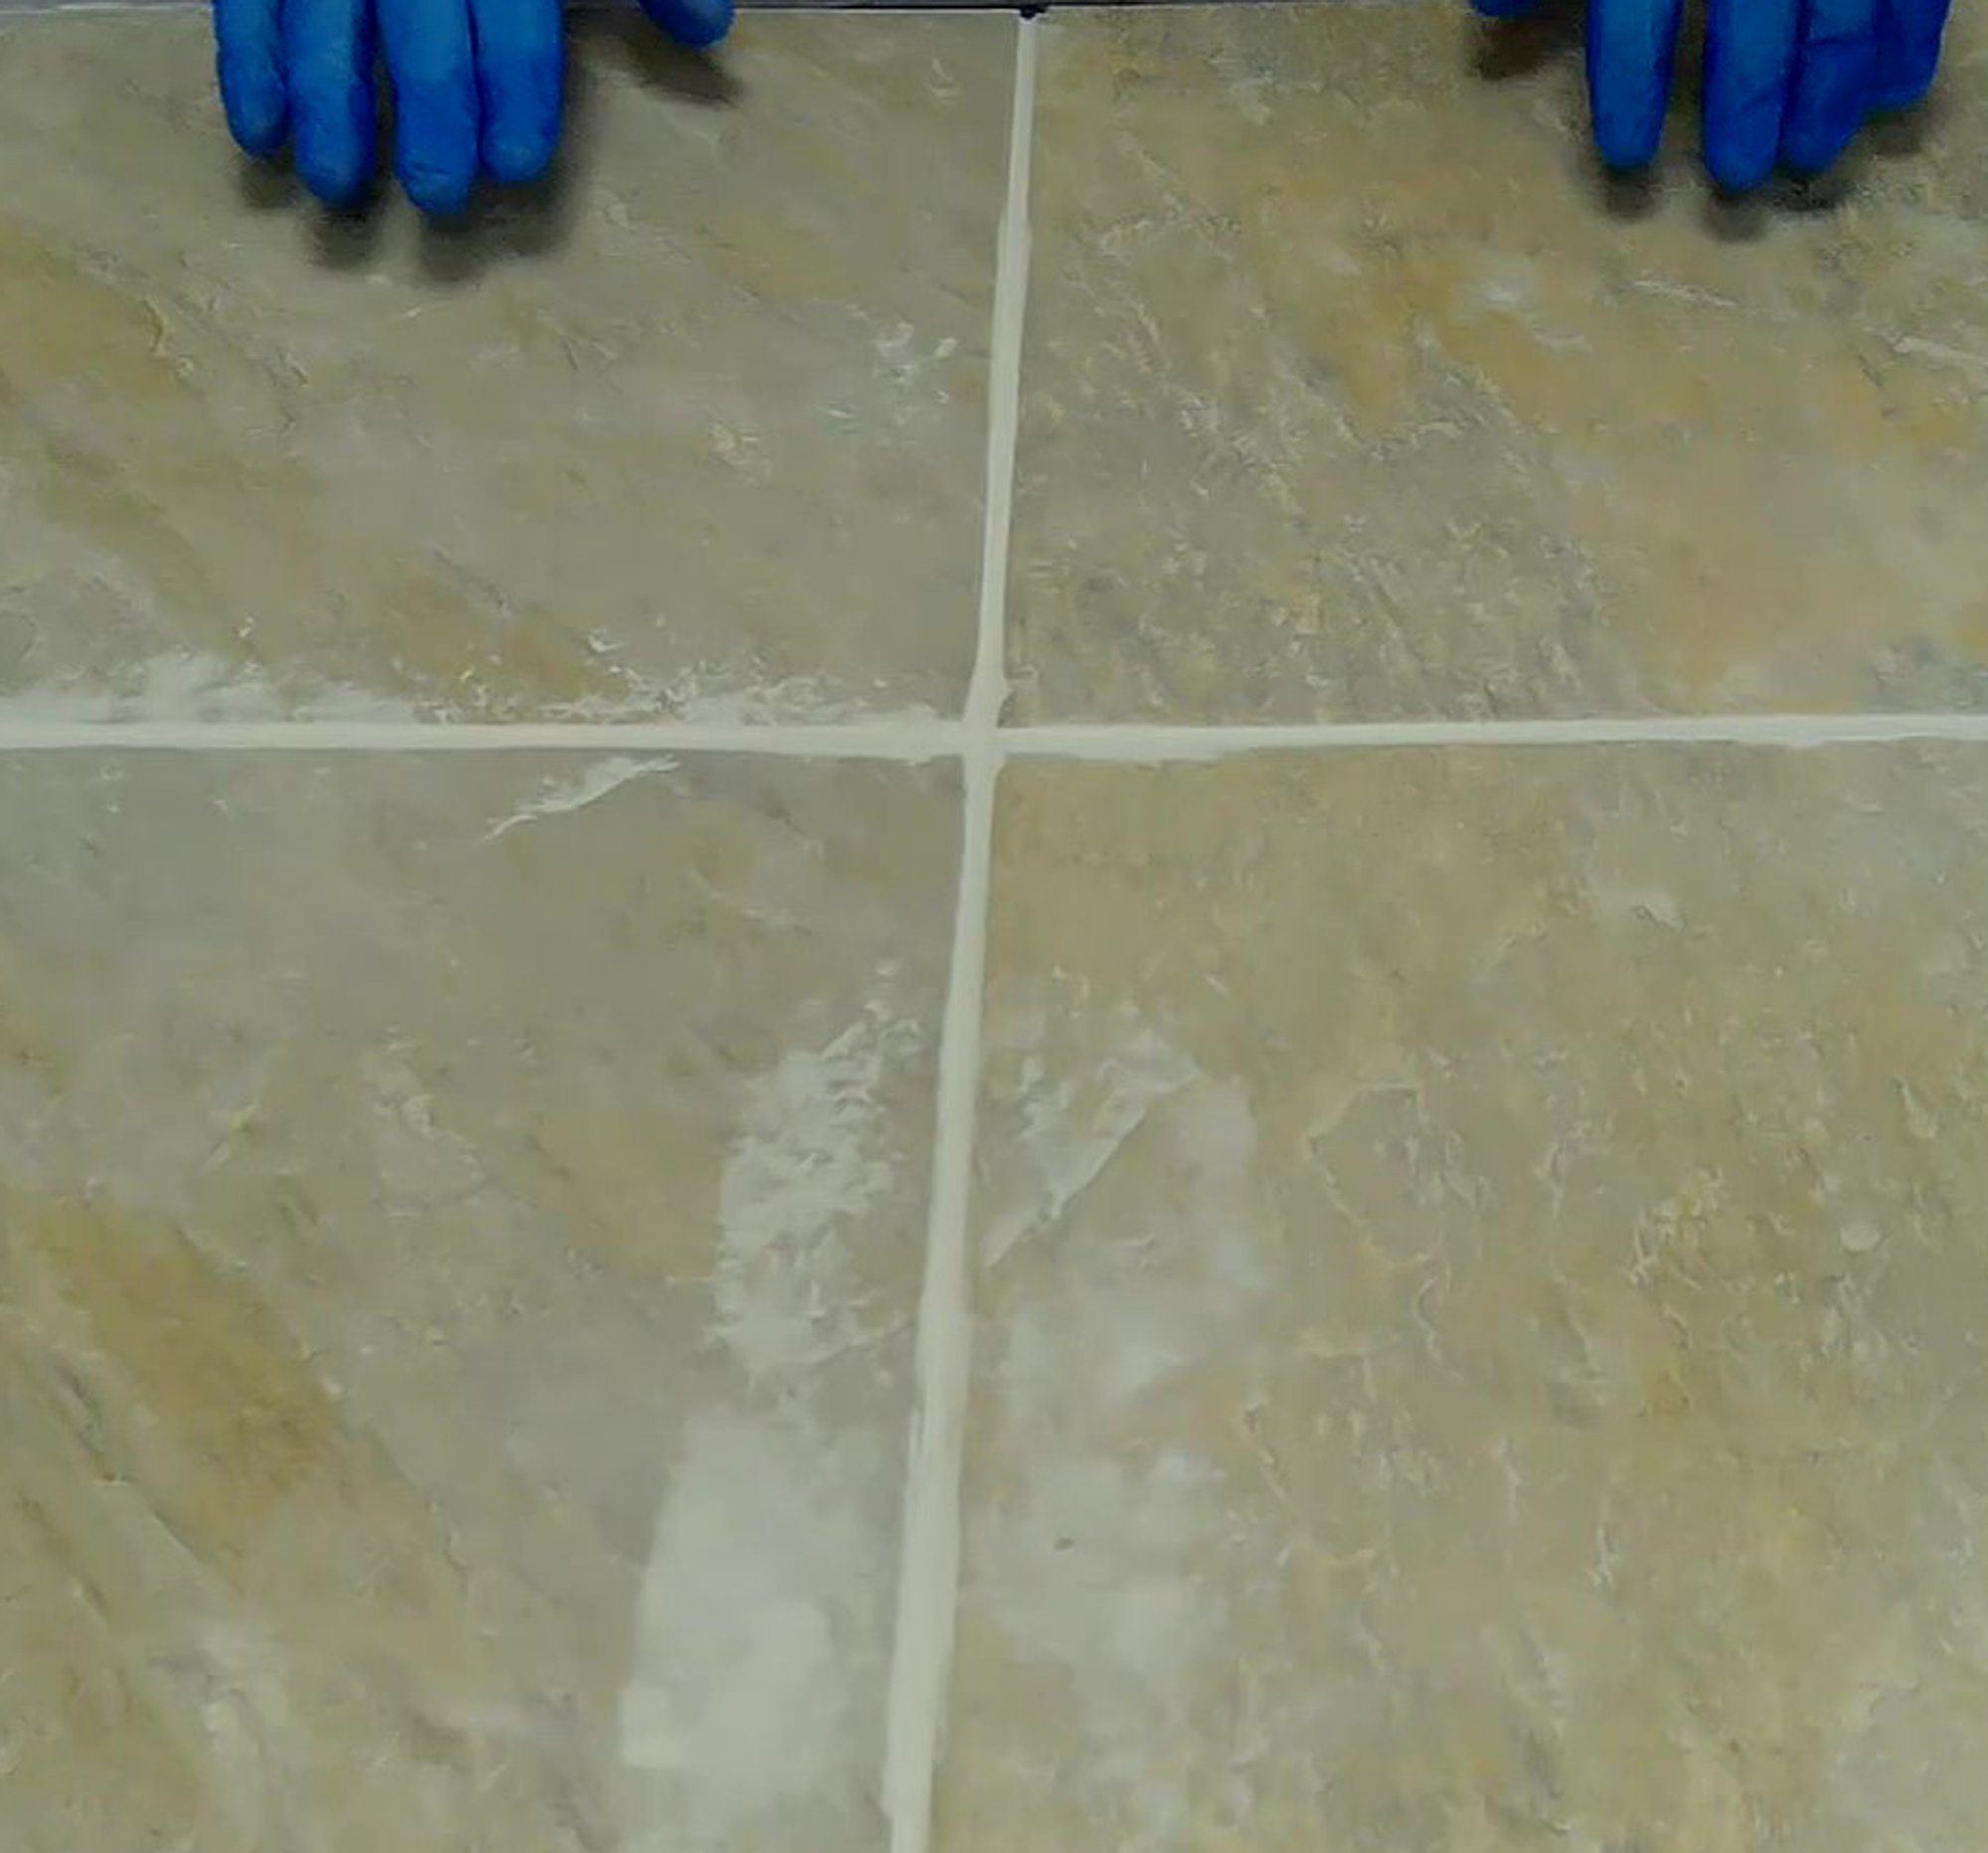 Solvex - Removing Epoxy Grout Residue on porcelain tiles.jpg